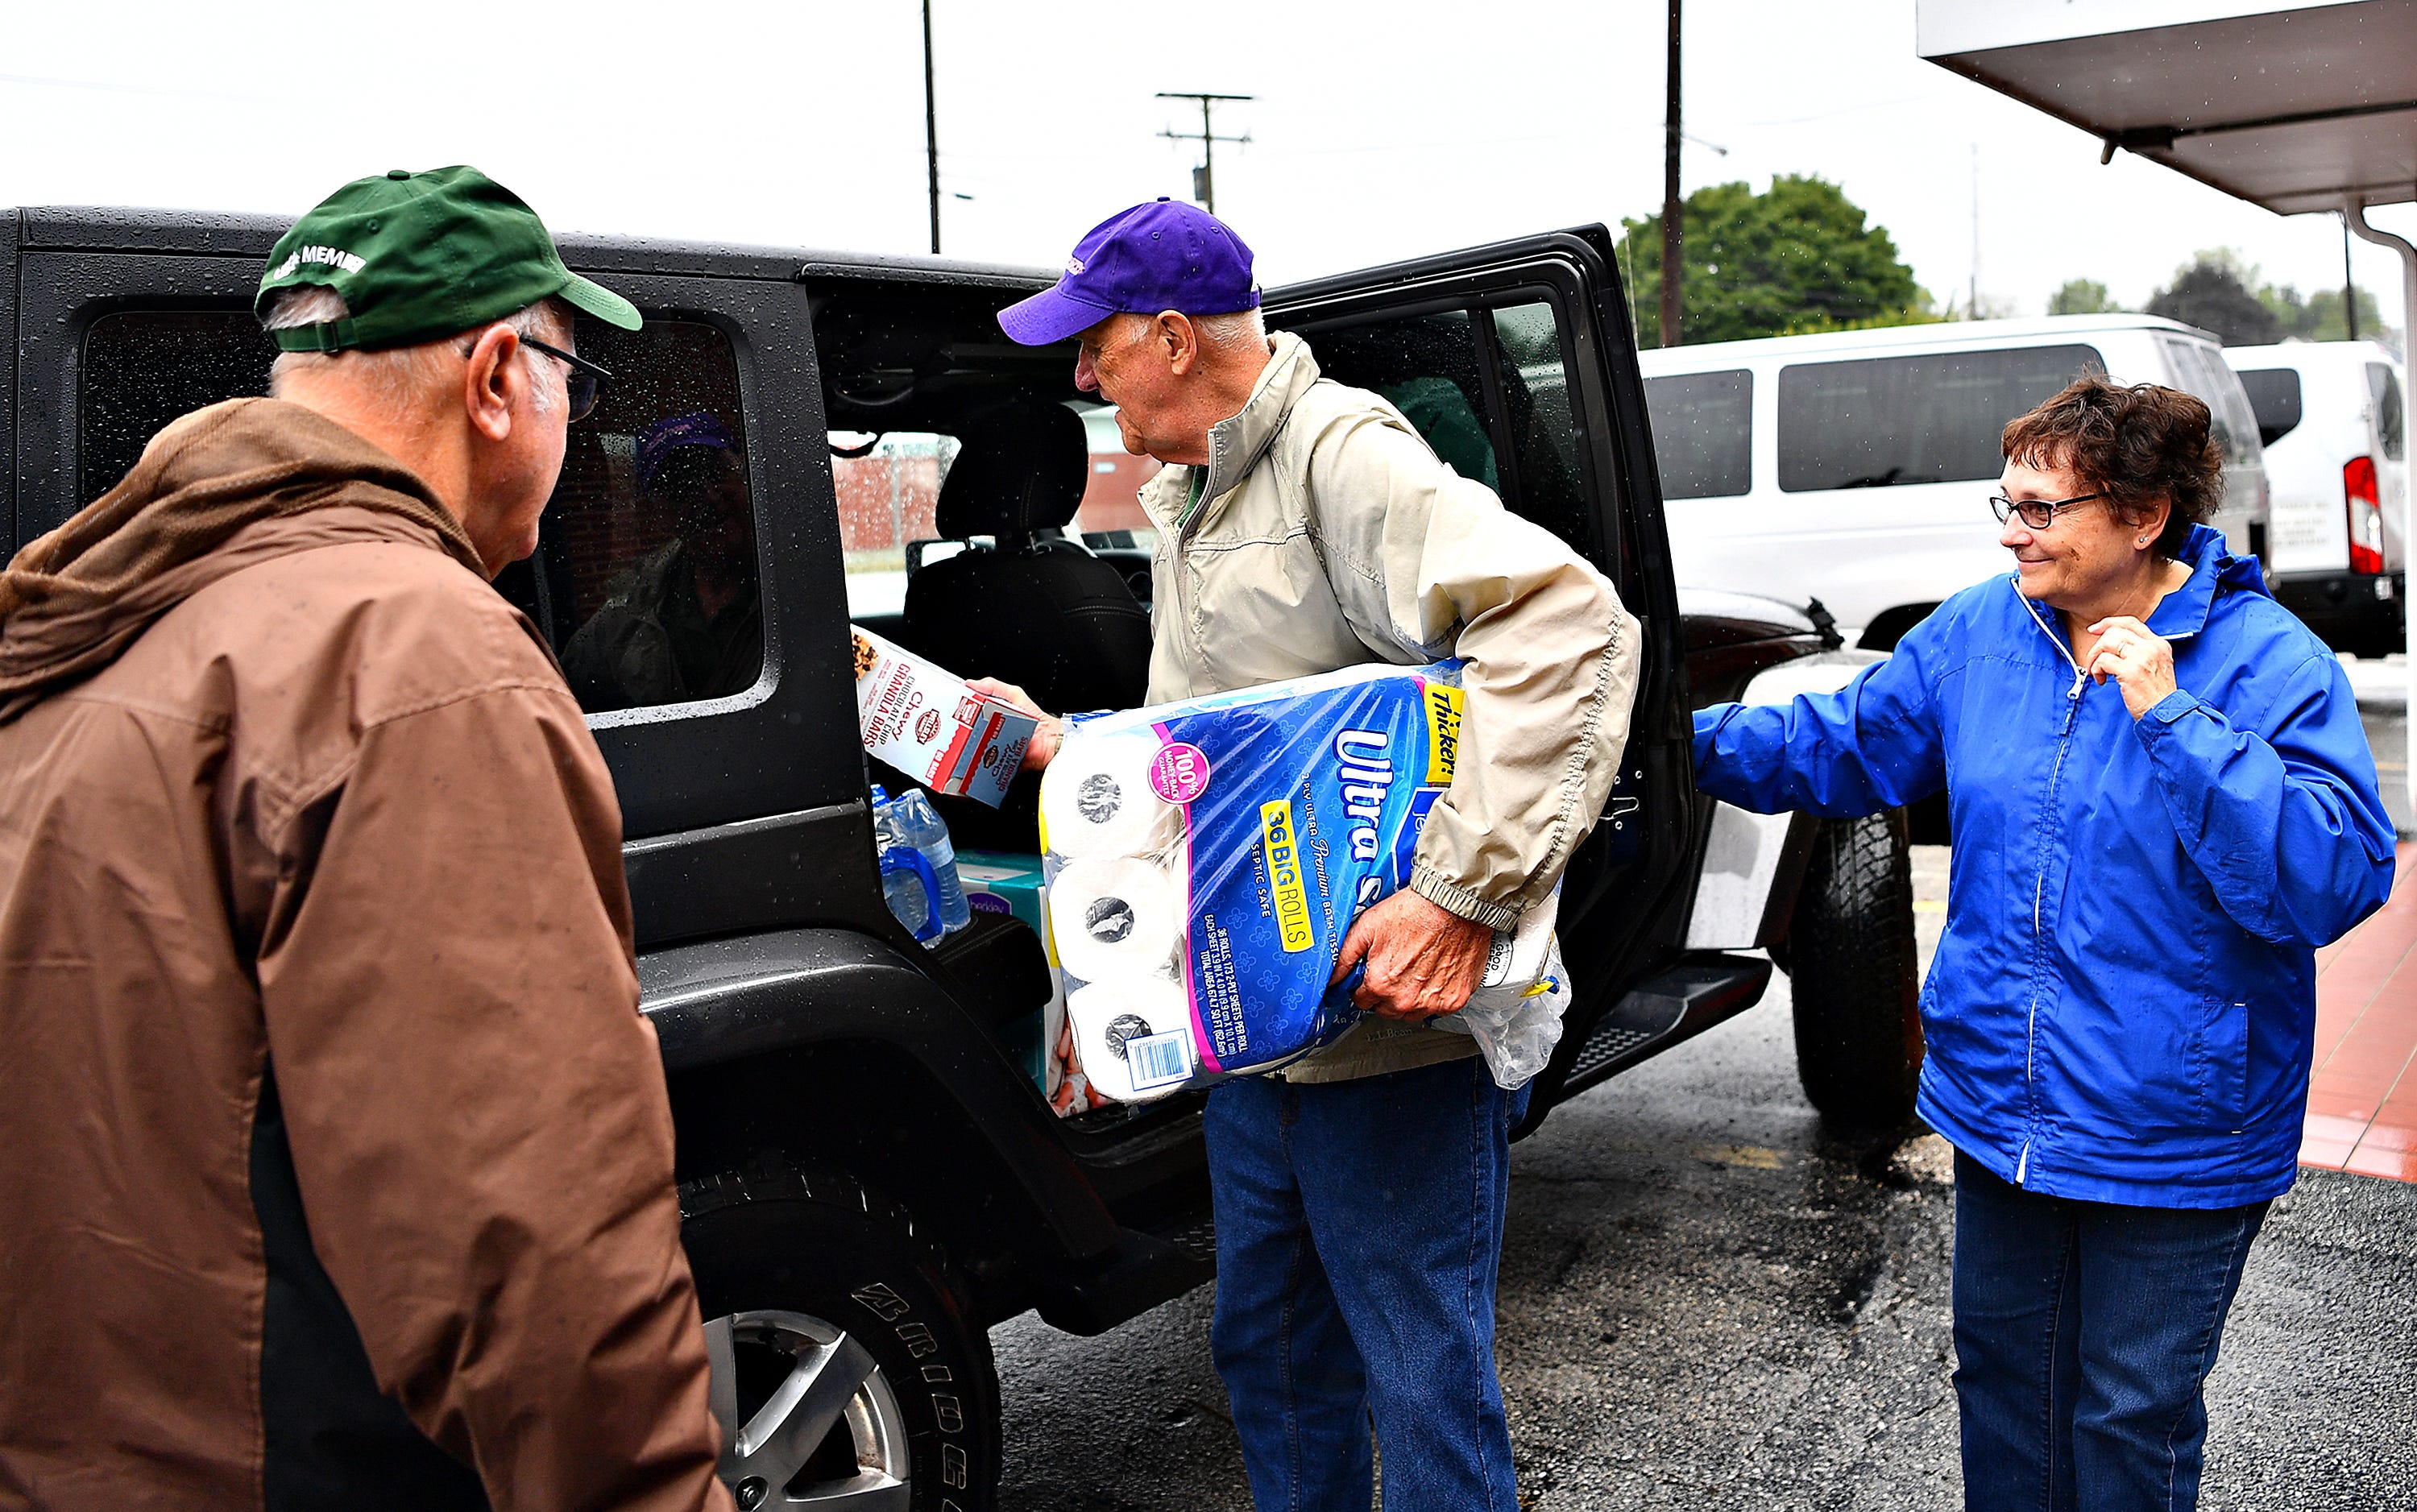 Fred Noble, center, of Bailey Coach, receives a donation from Dennis Delp, left, and Linda Delp, both of West Manchester Township, at Bailey Coach in West Manchester Township, Tuesday, Sept. 11, 2018. The items collected will be delivered to areas that are projected to be in the path of Hurricane Florence. Dawn J. Sagert photo